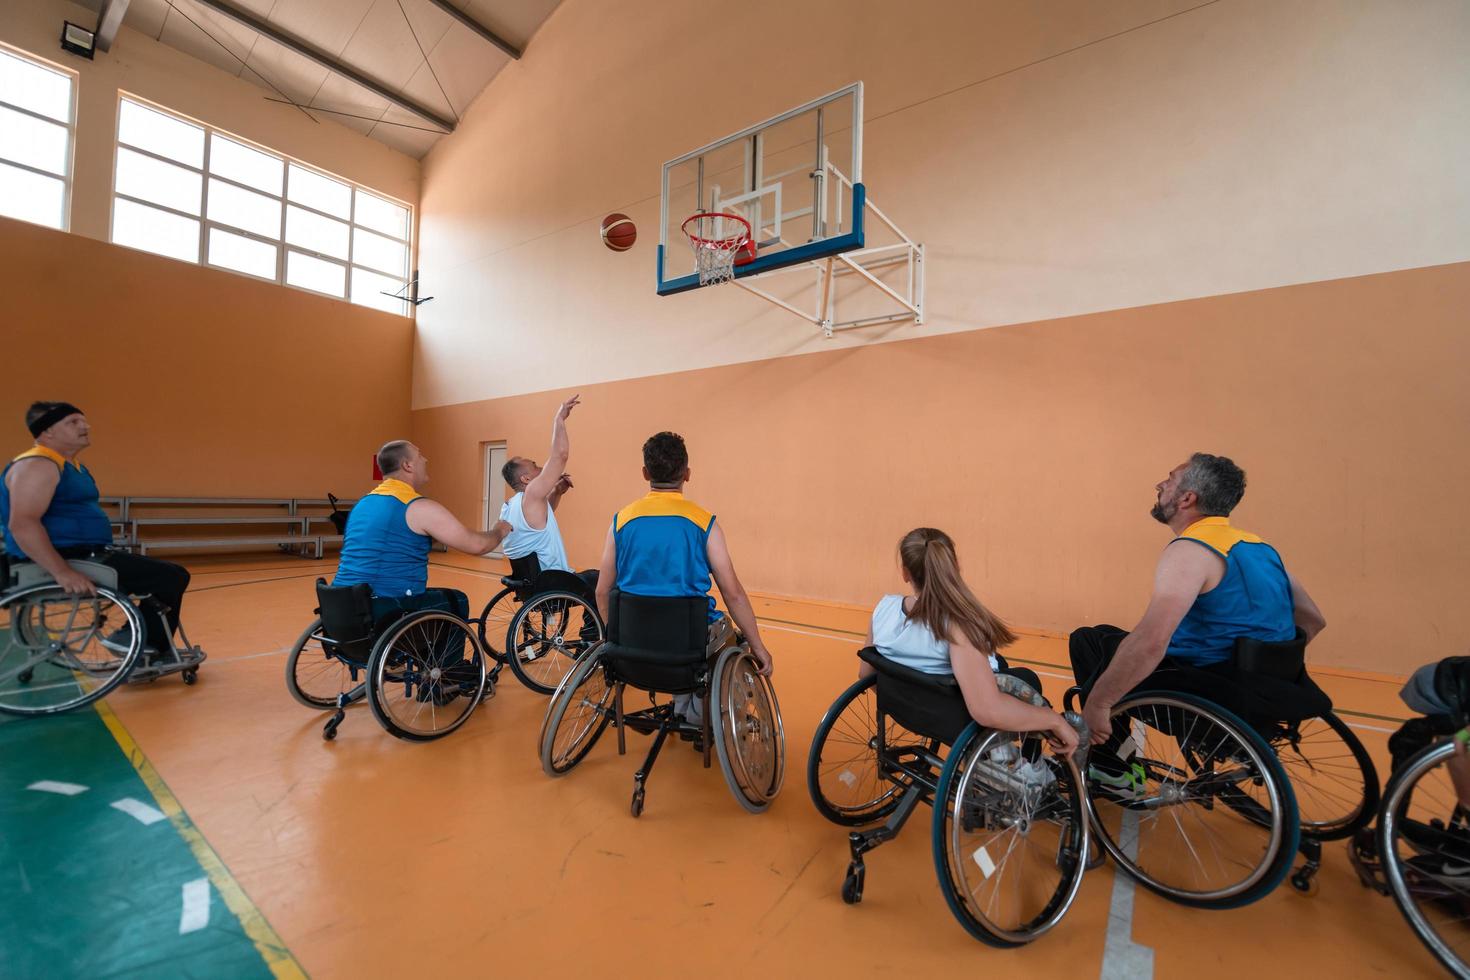 Disabled War veterans mixed race and age basketball teams in wheelchairs playing a training match in a sports gym hall. Handicapped people rehabilitation and inclusion concept photo